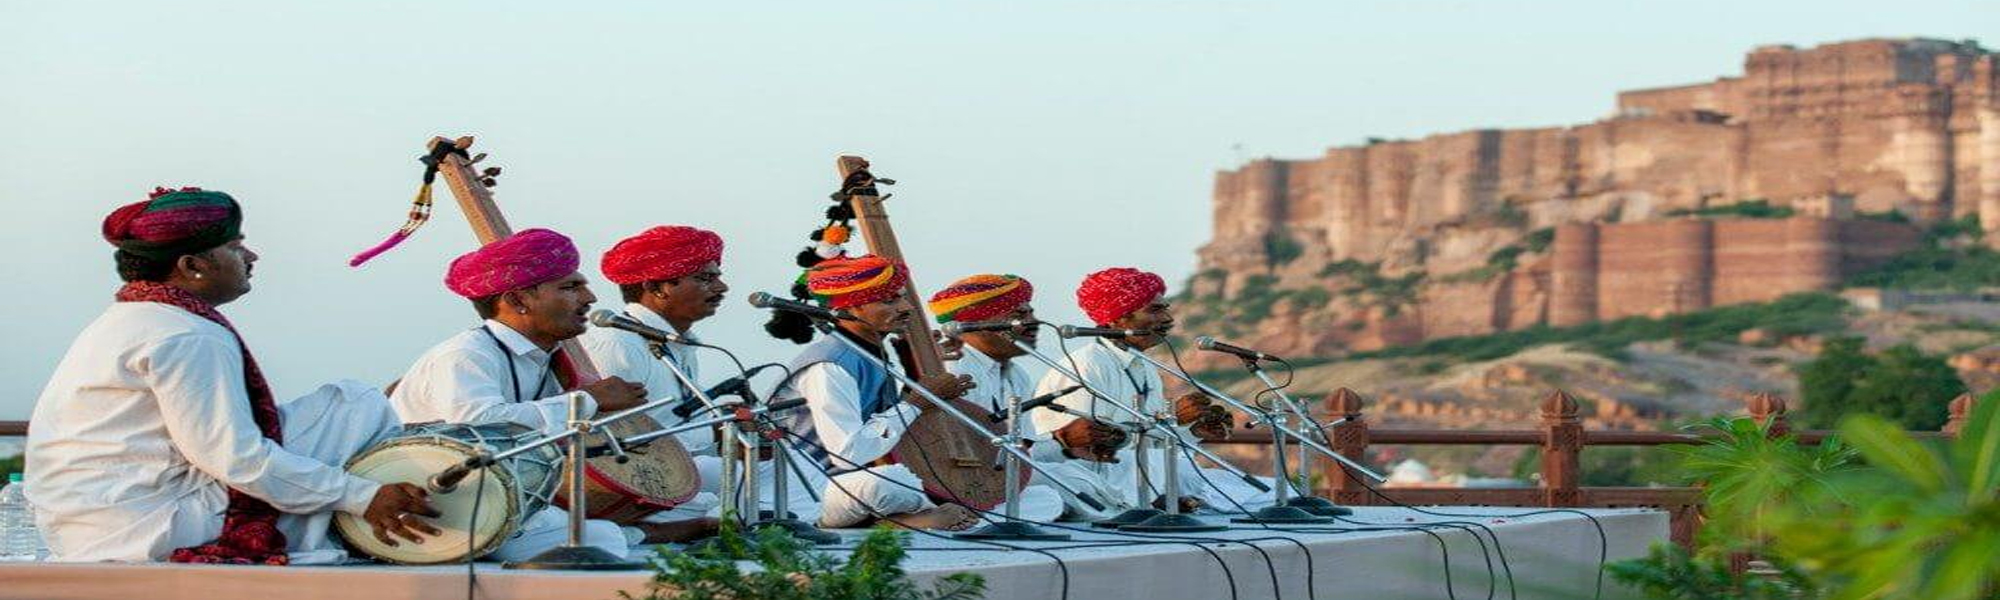 Desert Festival Tours in India with Desert Triangle Tours in India  